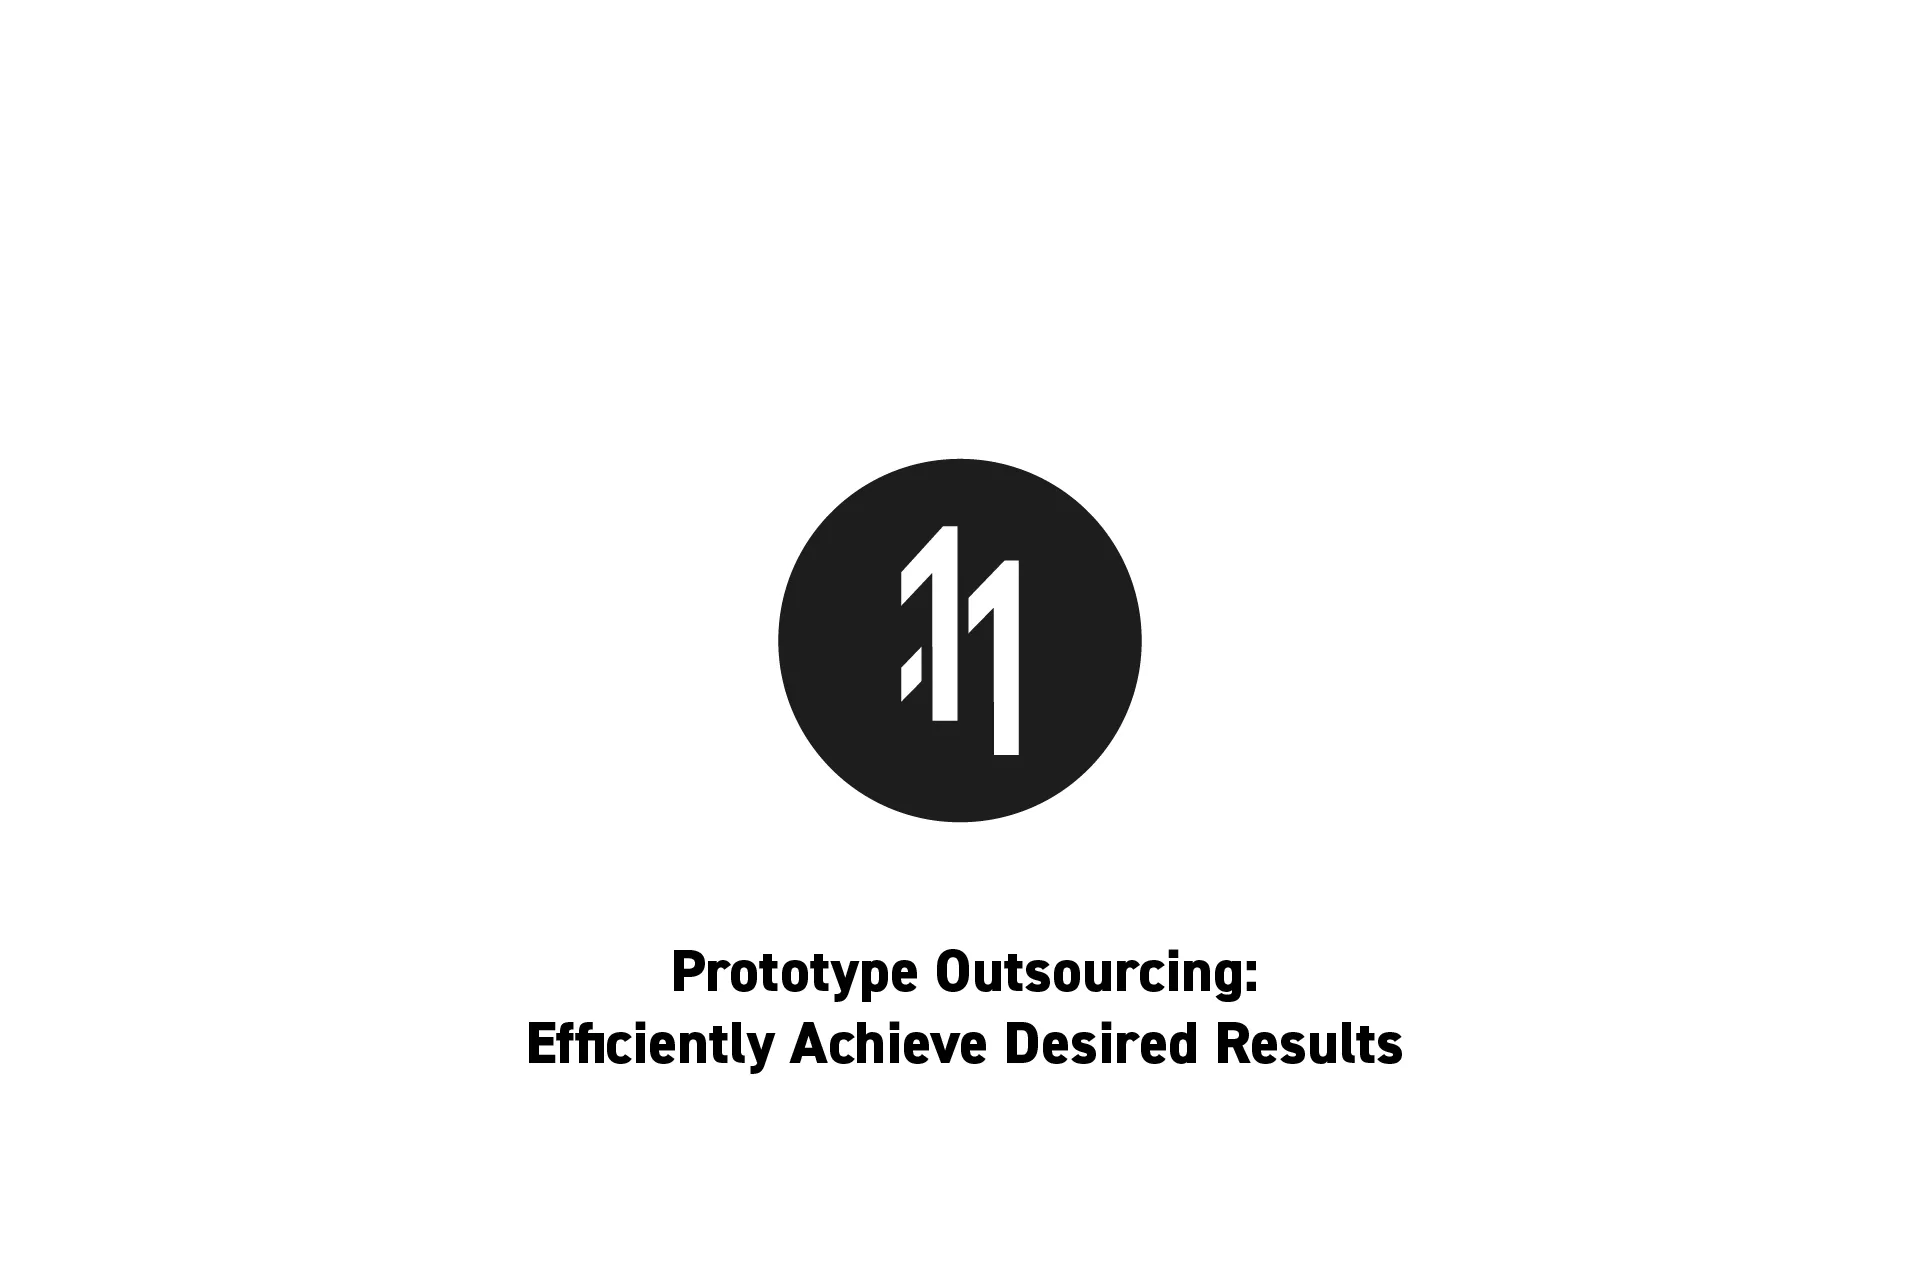 The delasign logo with the text "Prototype Outsourcing: Efficiently Achieve Desired Results" beneath it.